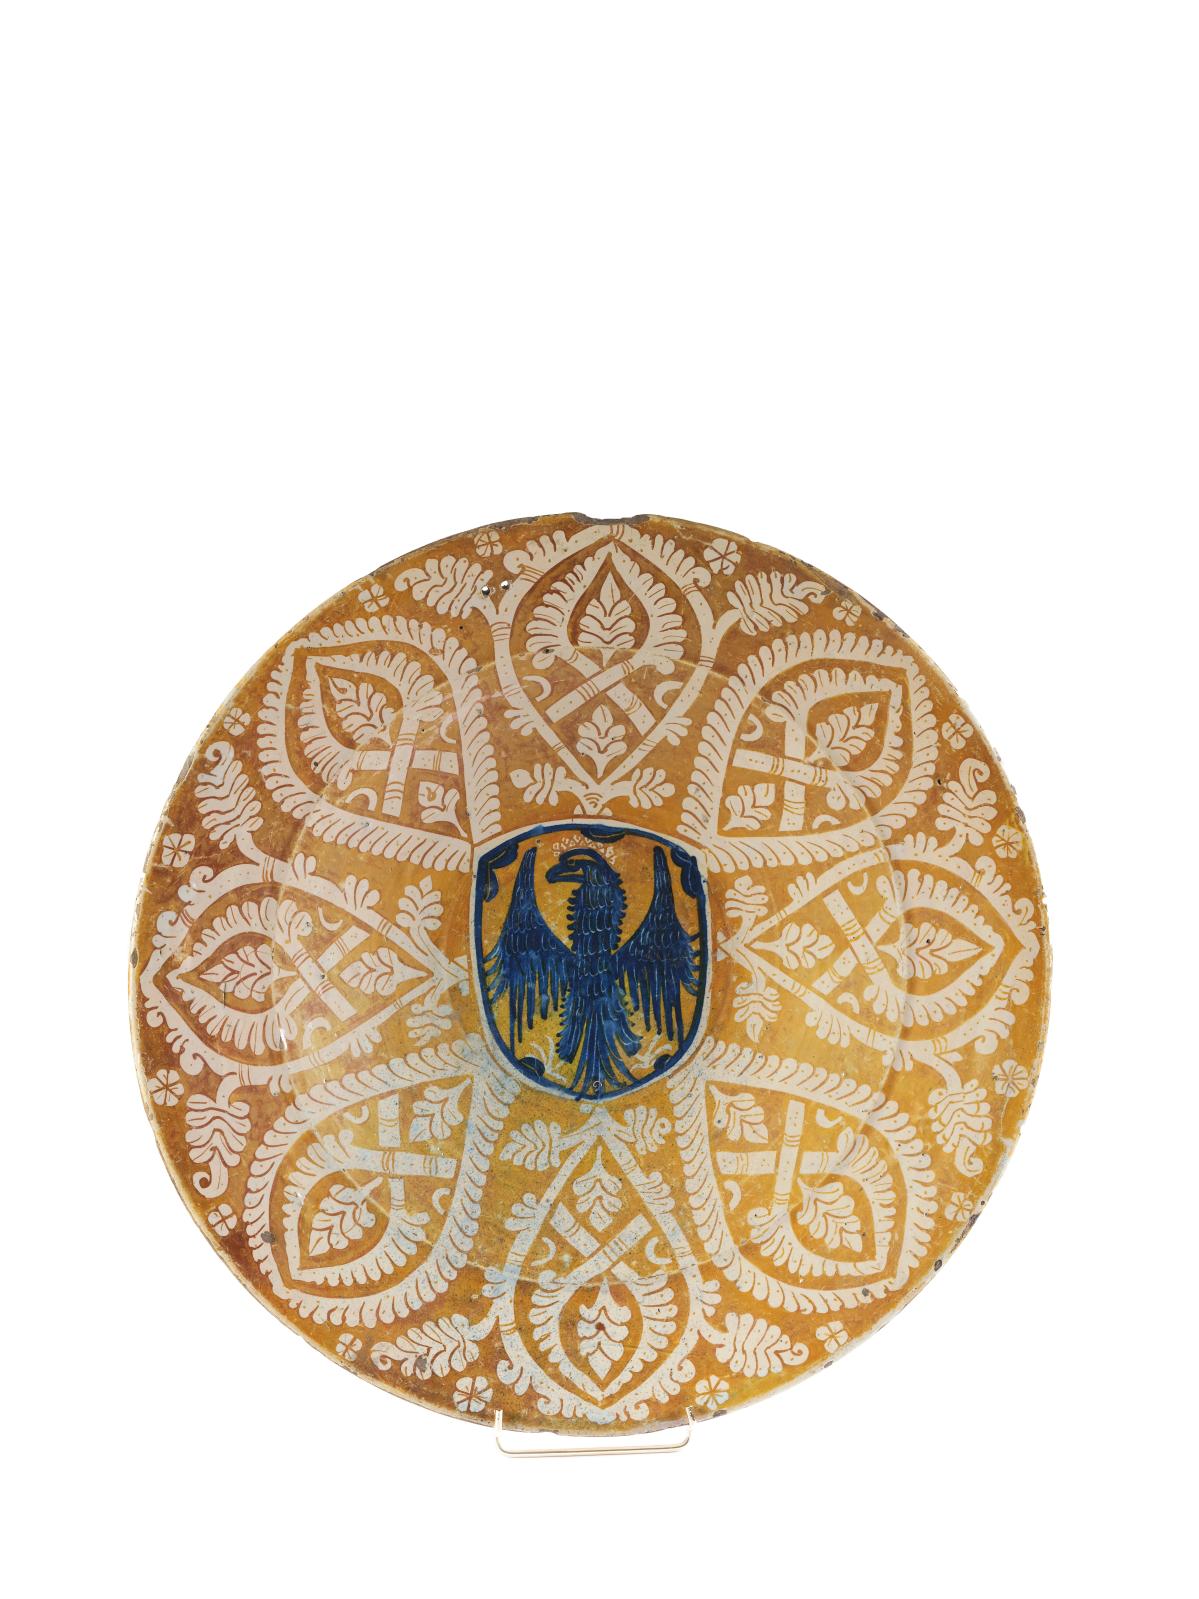 Large round earthenware dish decorated with a blue coat of arms in the center, stylized foliage on a lustrous ochre ground, c. 1450-1475, diam. 46 cm/18.1 in. Saint-Cloud, October 6, 2019. Le Floc'h auction house. Mr. Froissart. Result: €43,750.